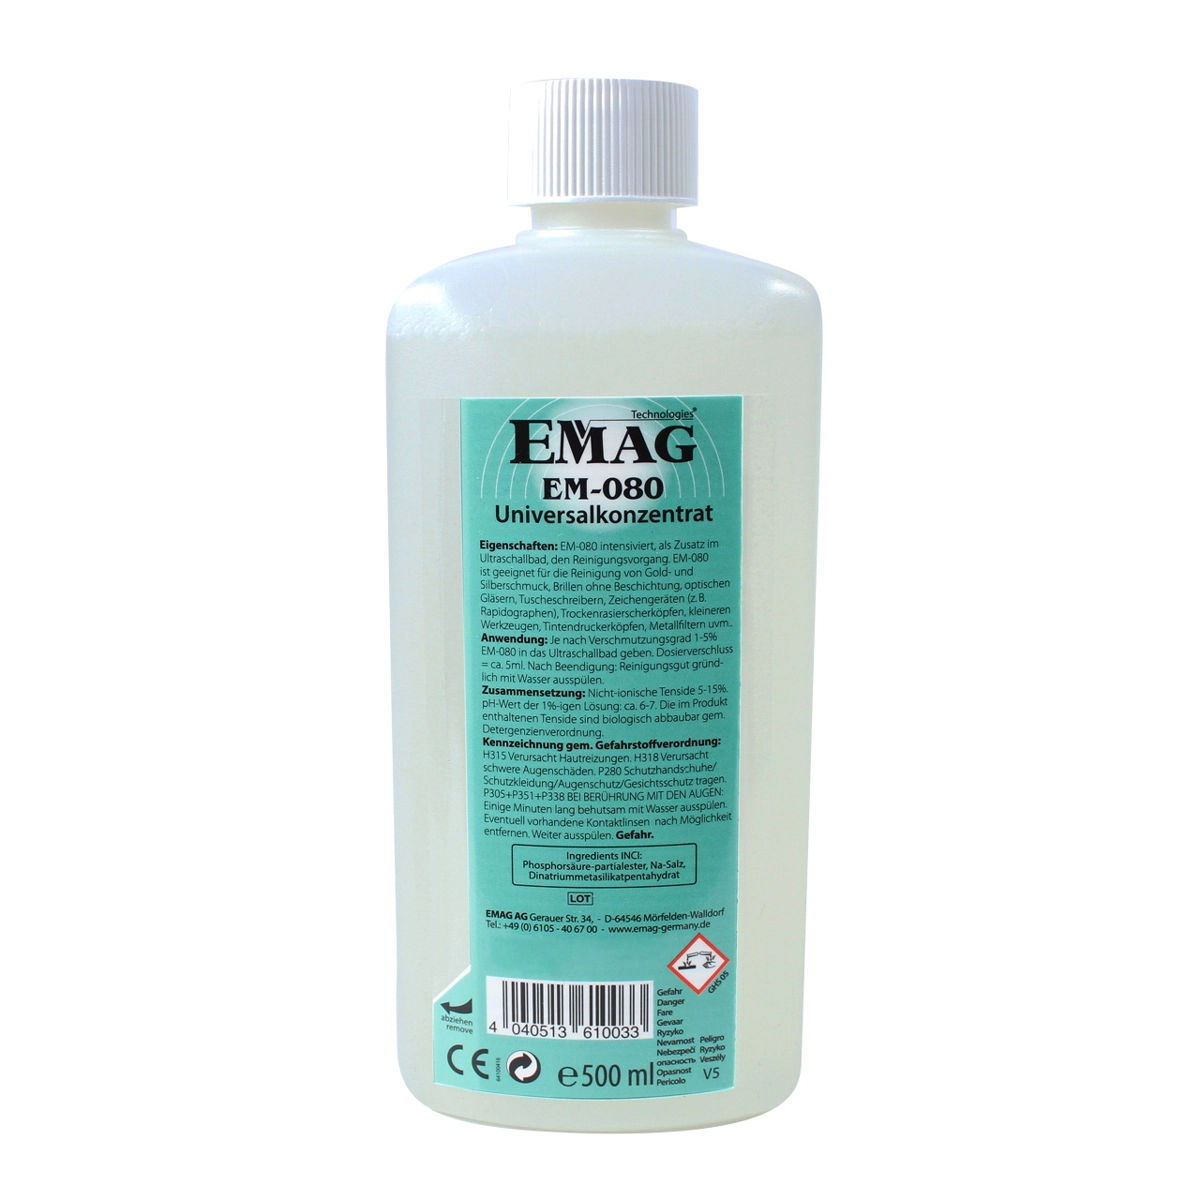 EM-080 Universal cleaning concentrate